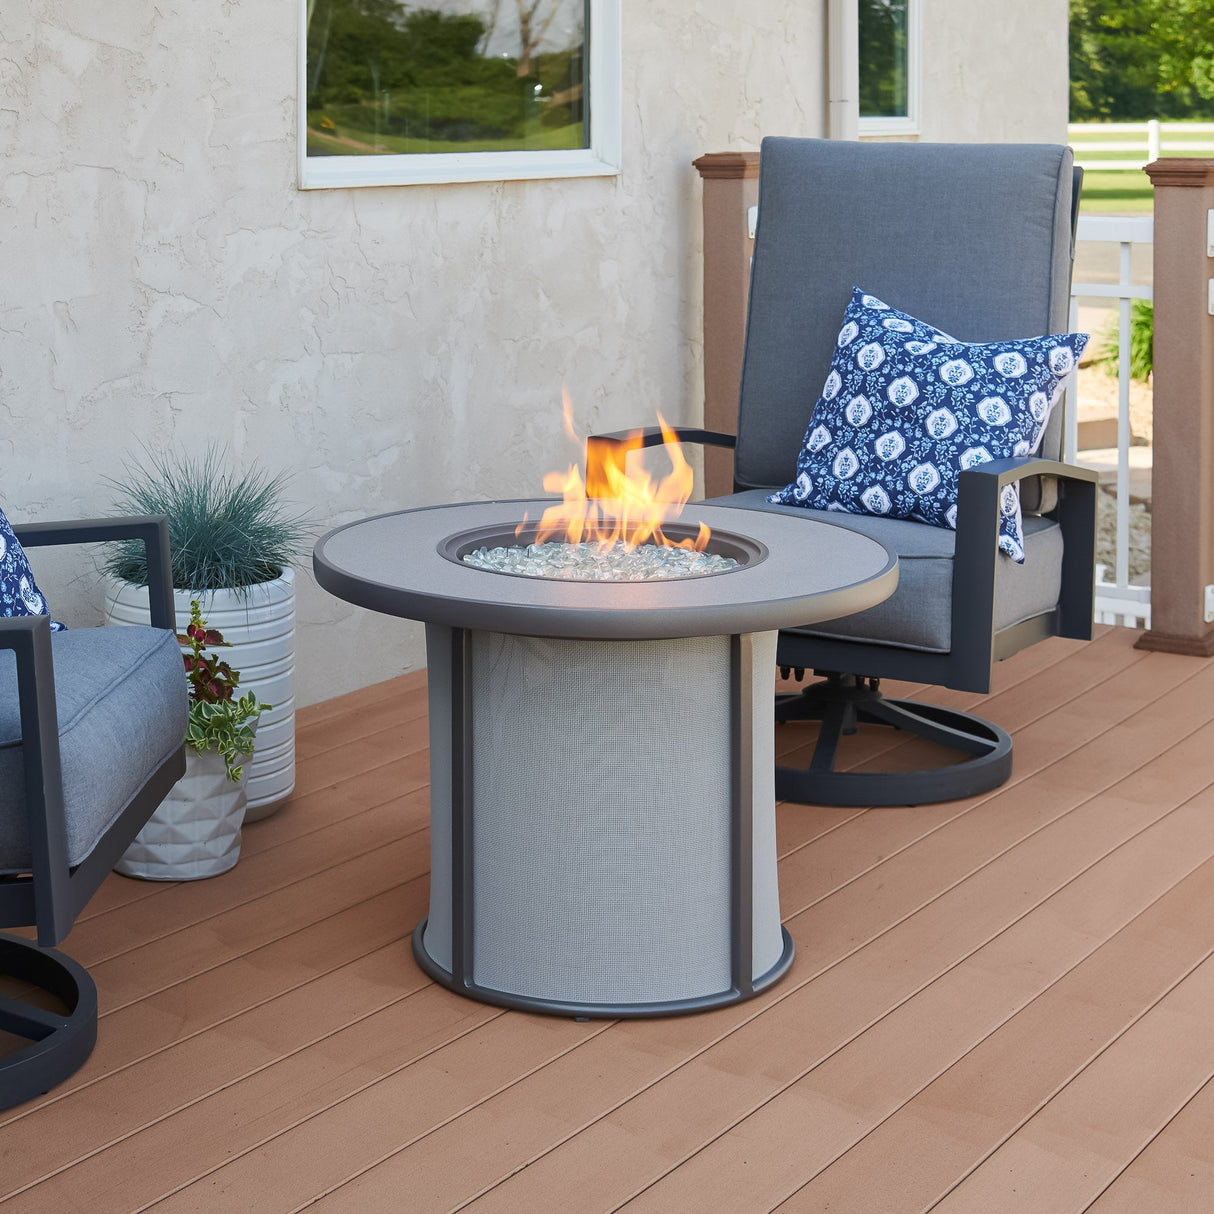 The Grey Stonefire Round Gas Fire Pit Table on an outdoor patio